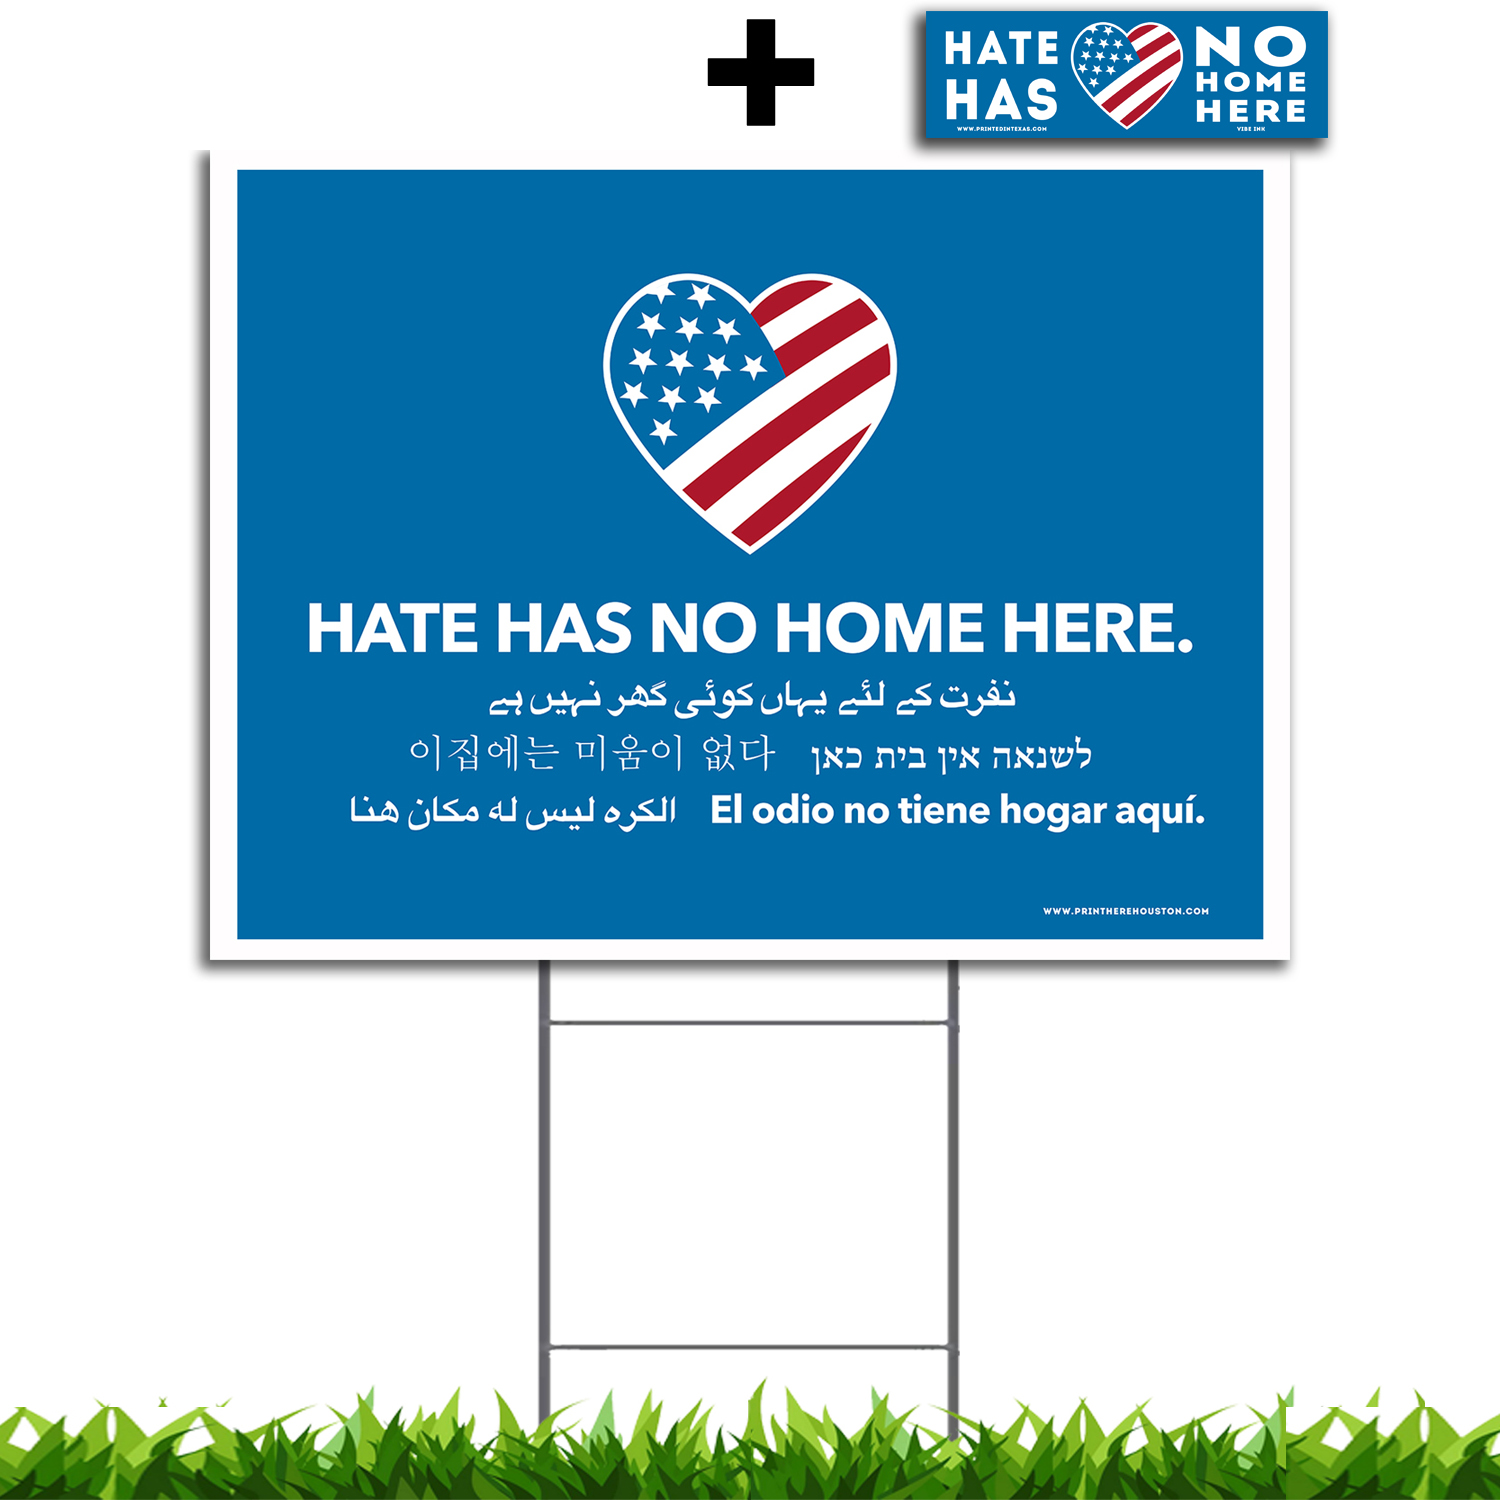 Black lives matter Yard Sign Hate Has No Home Here Sign LGBT Sign Double-sided Print 18x24in We Stand together